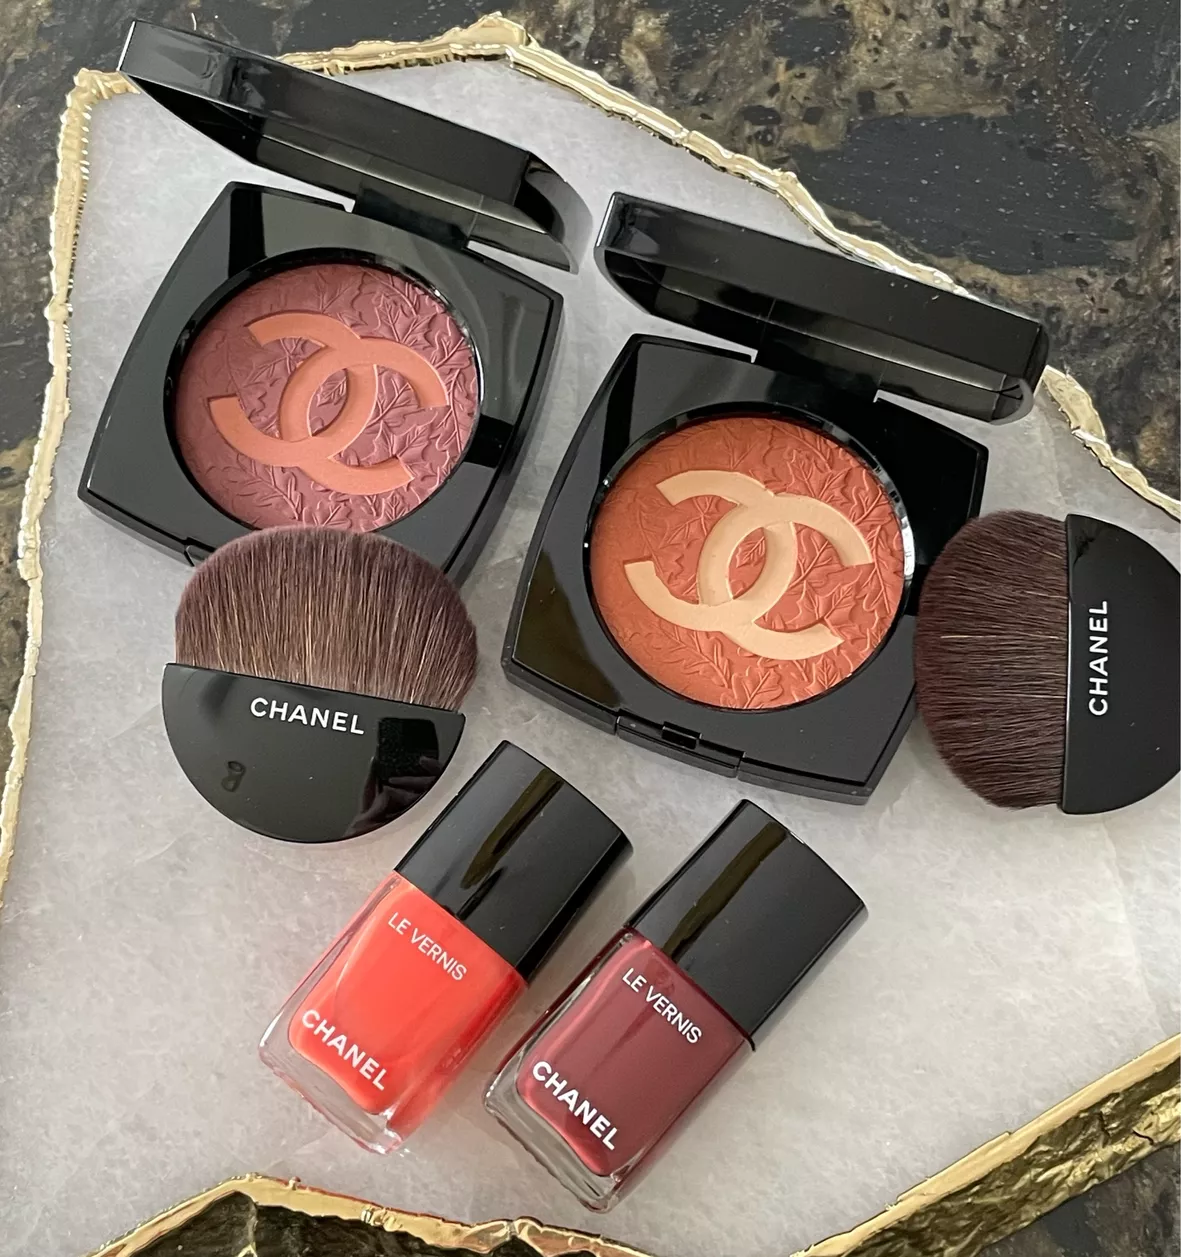 My Entire Chanel Les Exclusifs Collection! Discussion & thoughts